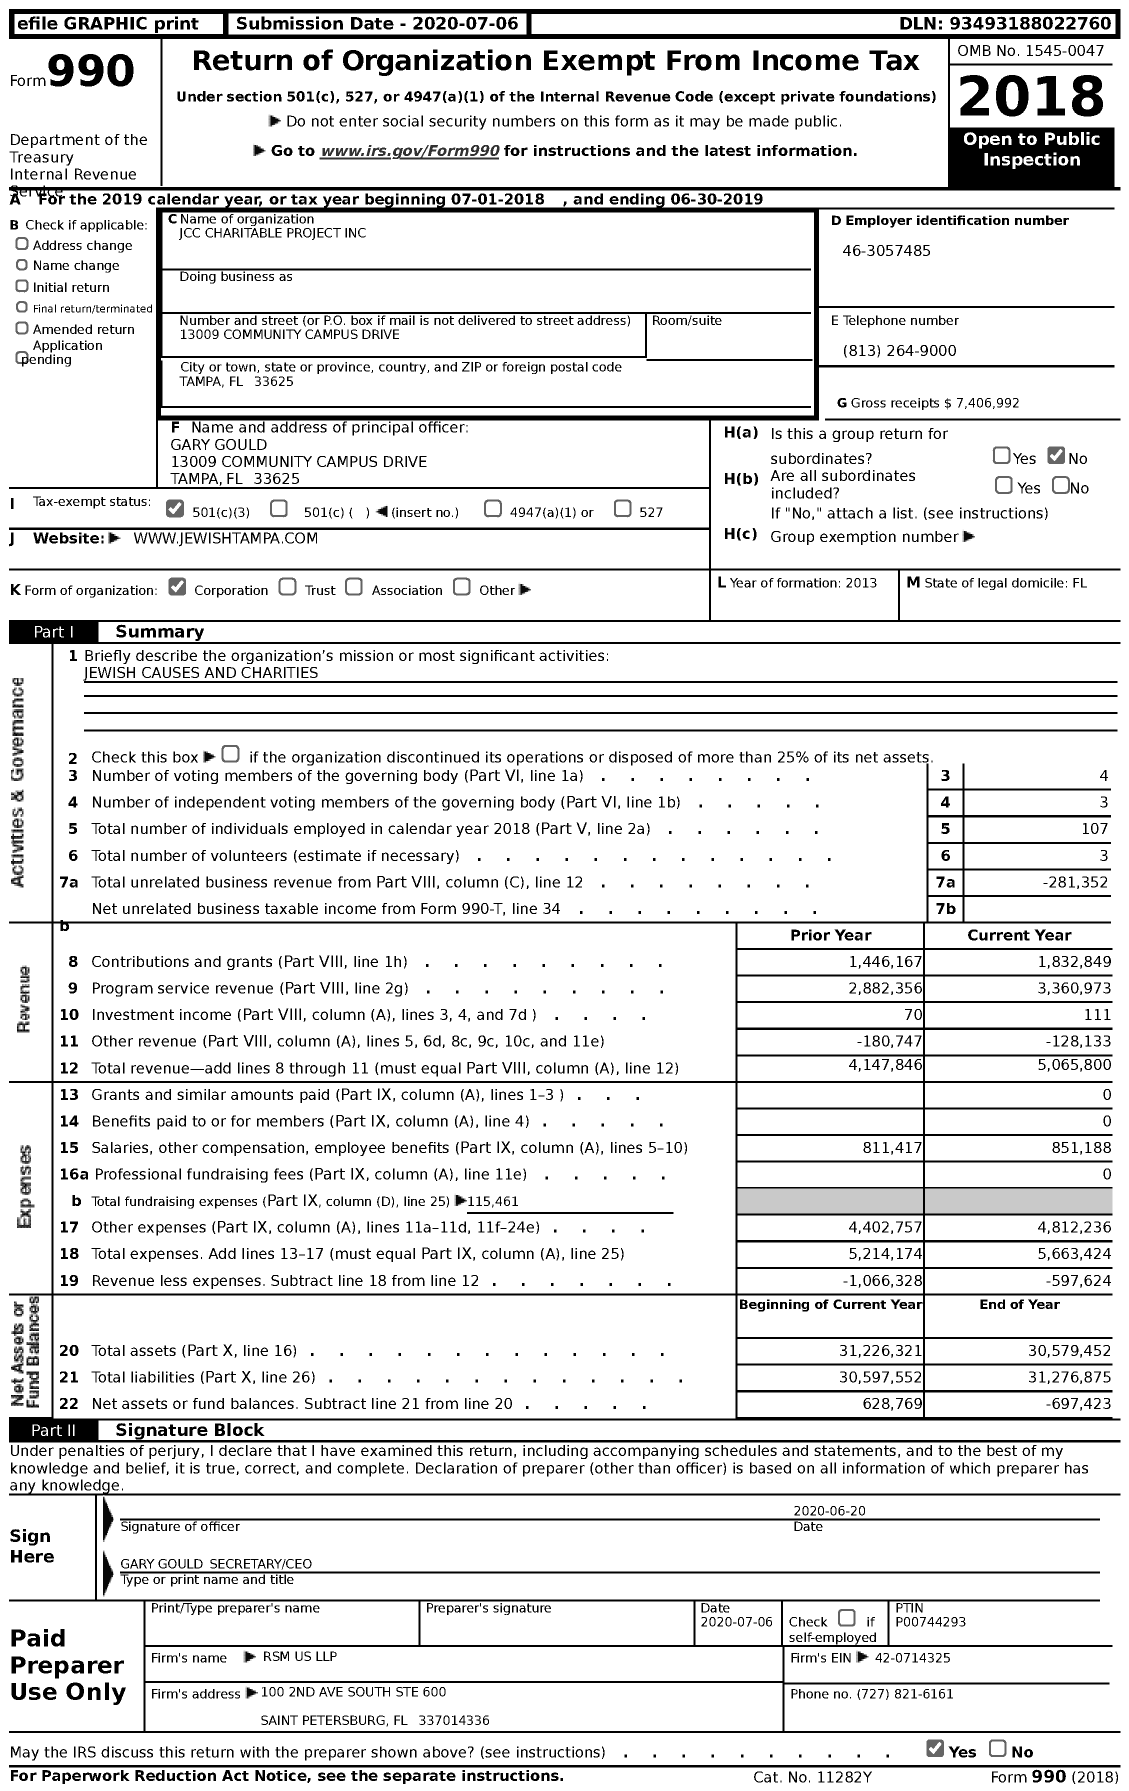 Image of first page of 2018 Form 990 for JCC Charitable Project